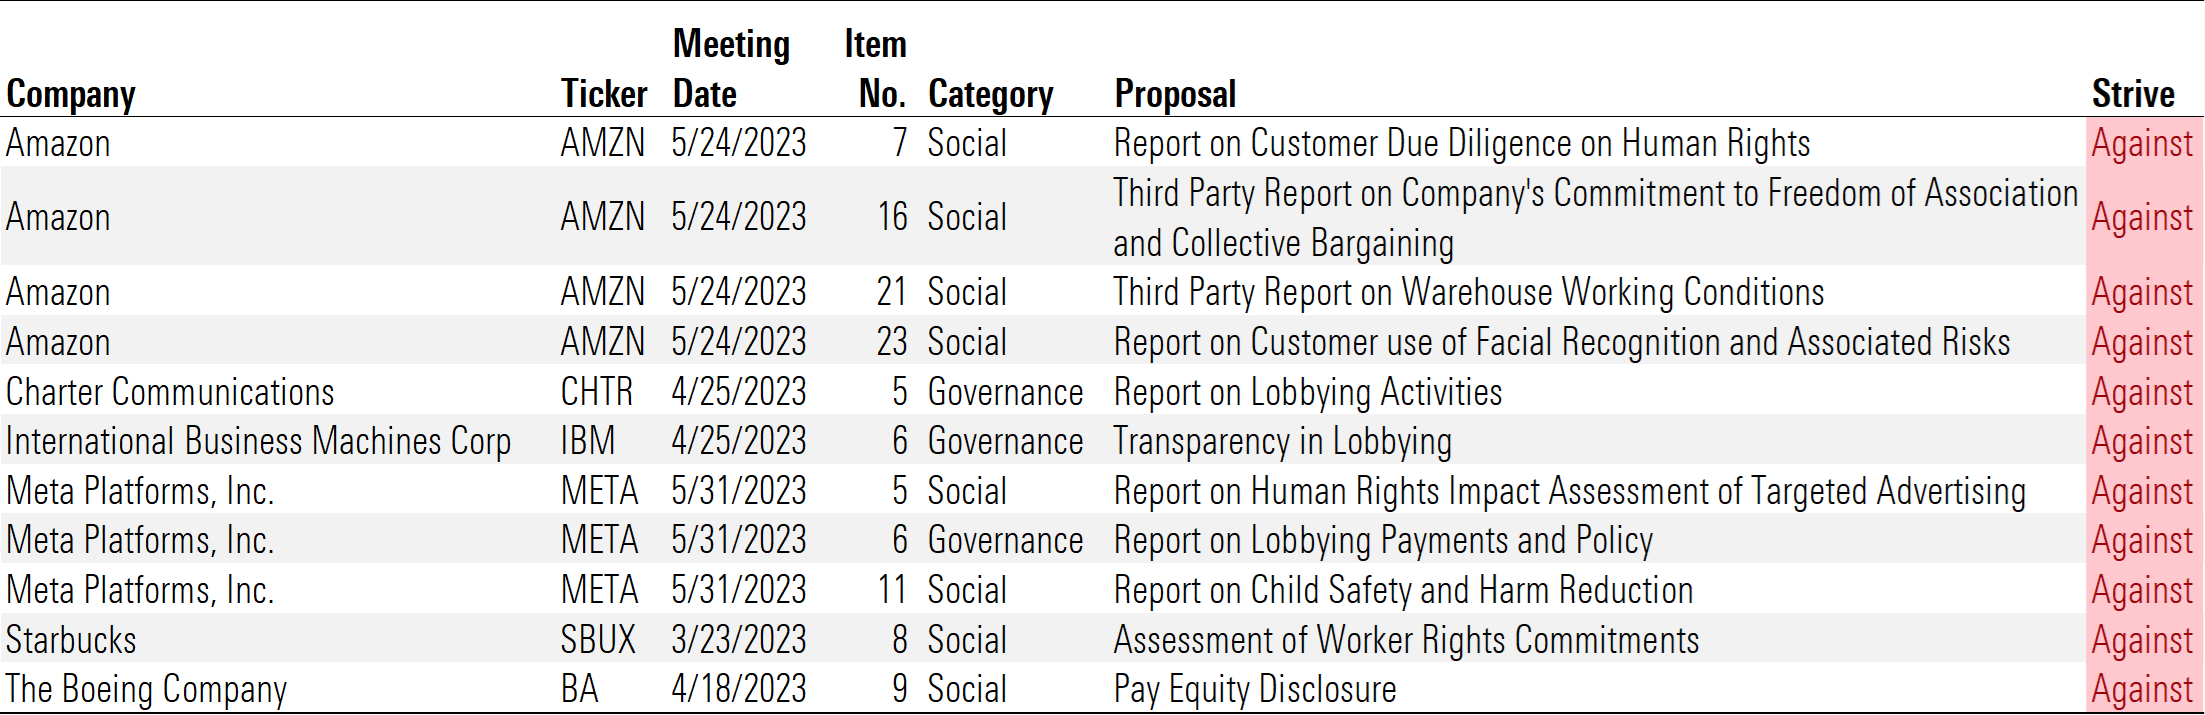 Table showing Strive’s Voting Decisions on 11 Key ESG Shareholder Resolutions